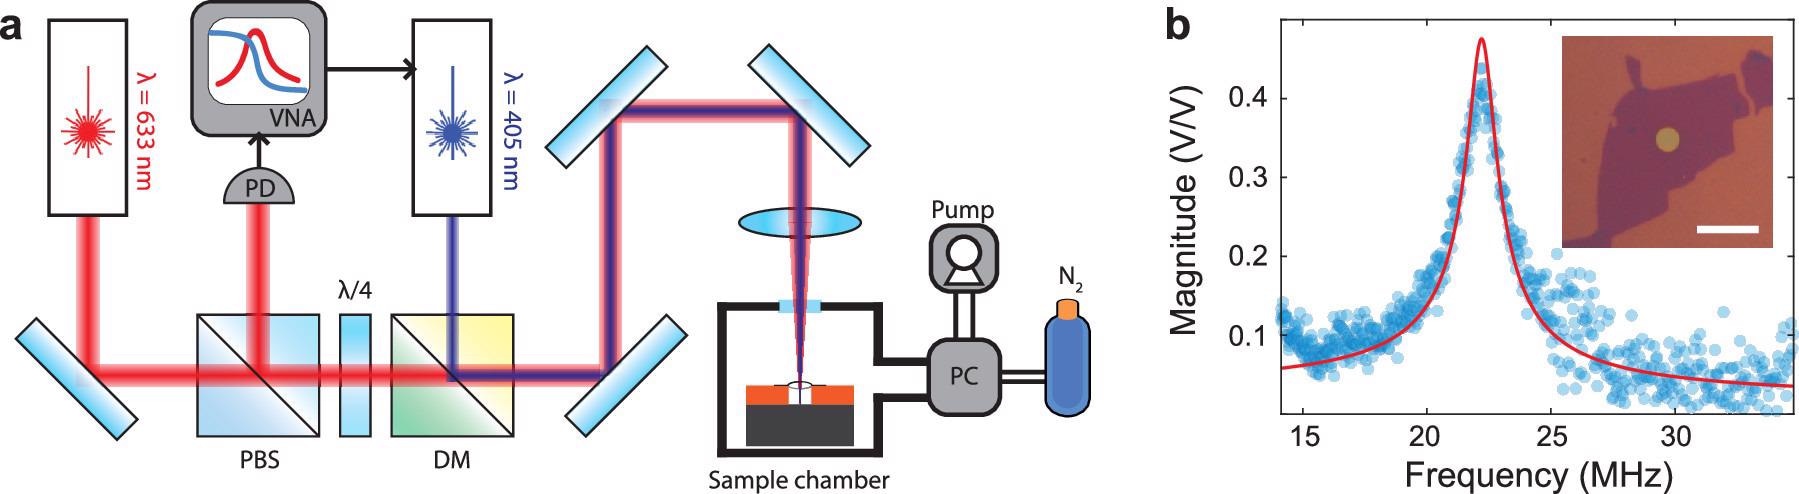 (a) Schematic illustration of the measurement setup. Vector network analyzer (VNA) sends an amplitude modulated signal to the blue laser diode which optothermally actuates the membrane while the red He–Ne laser reads out its motion. The reflected red laser light is detected at the photodetector (PD) and the signal is collected by the VNA. The pressure inside the sample chamber is controlled by the pressure controller (PC) which is connected to a scroll pump and a pressurized N2 gas bottle. PBS, polarized beam splitter; DM, dichroic mirror. (b) An example of a resonance peak of a SRO (16 u.c.) device with a harmonic oscillator fit in red. Inset: optical image of the device. A SRO flake is stamped on top of a circular cavity in SiO2/Si. Scale bar is 10 µm.